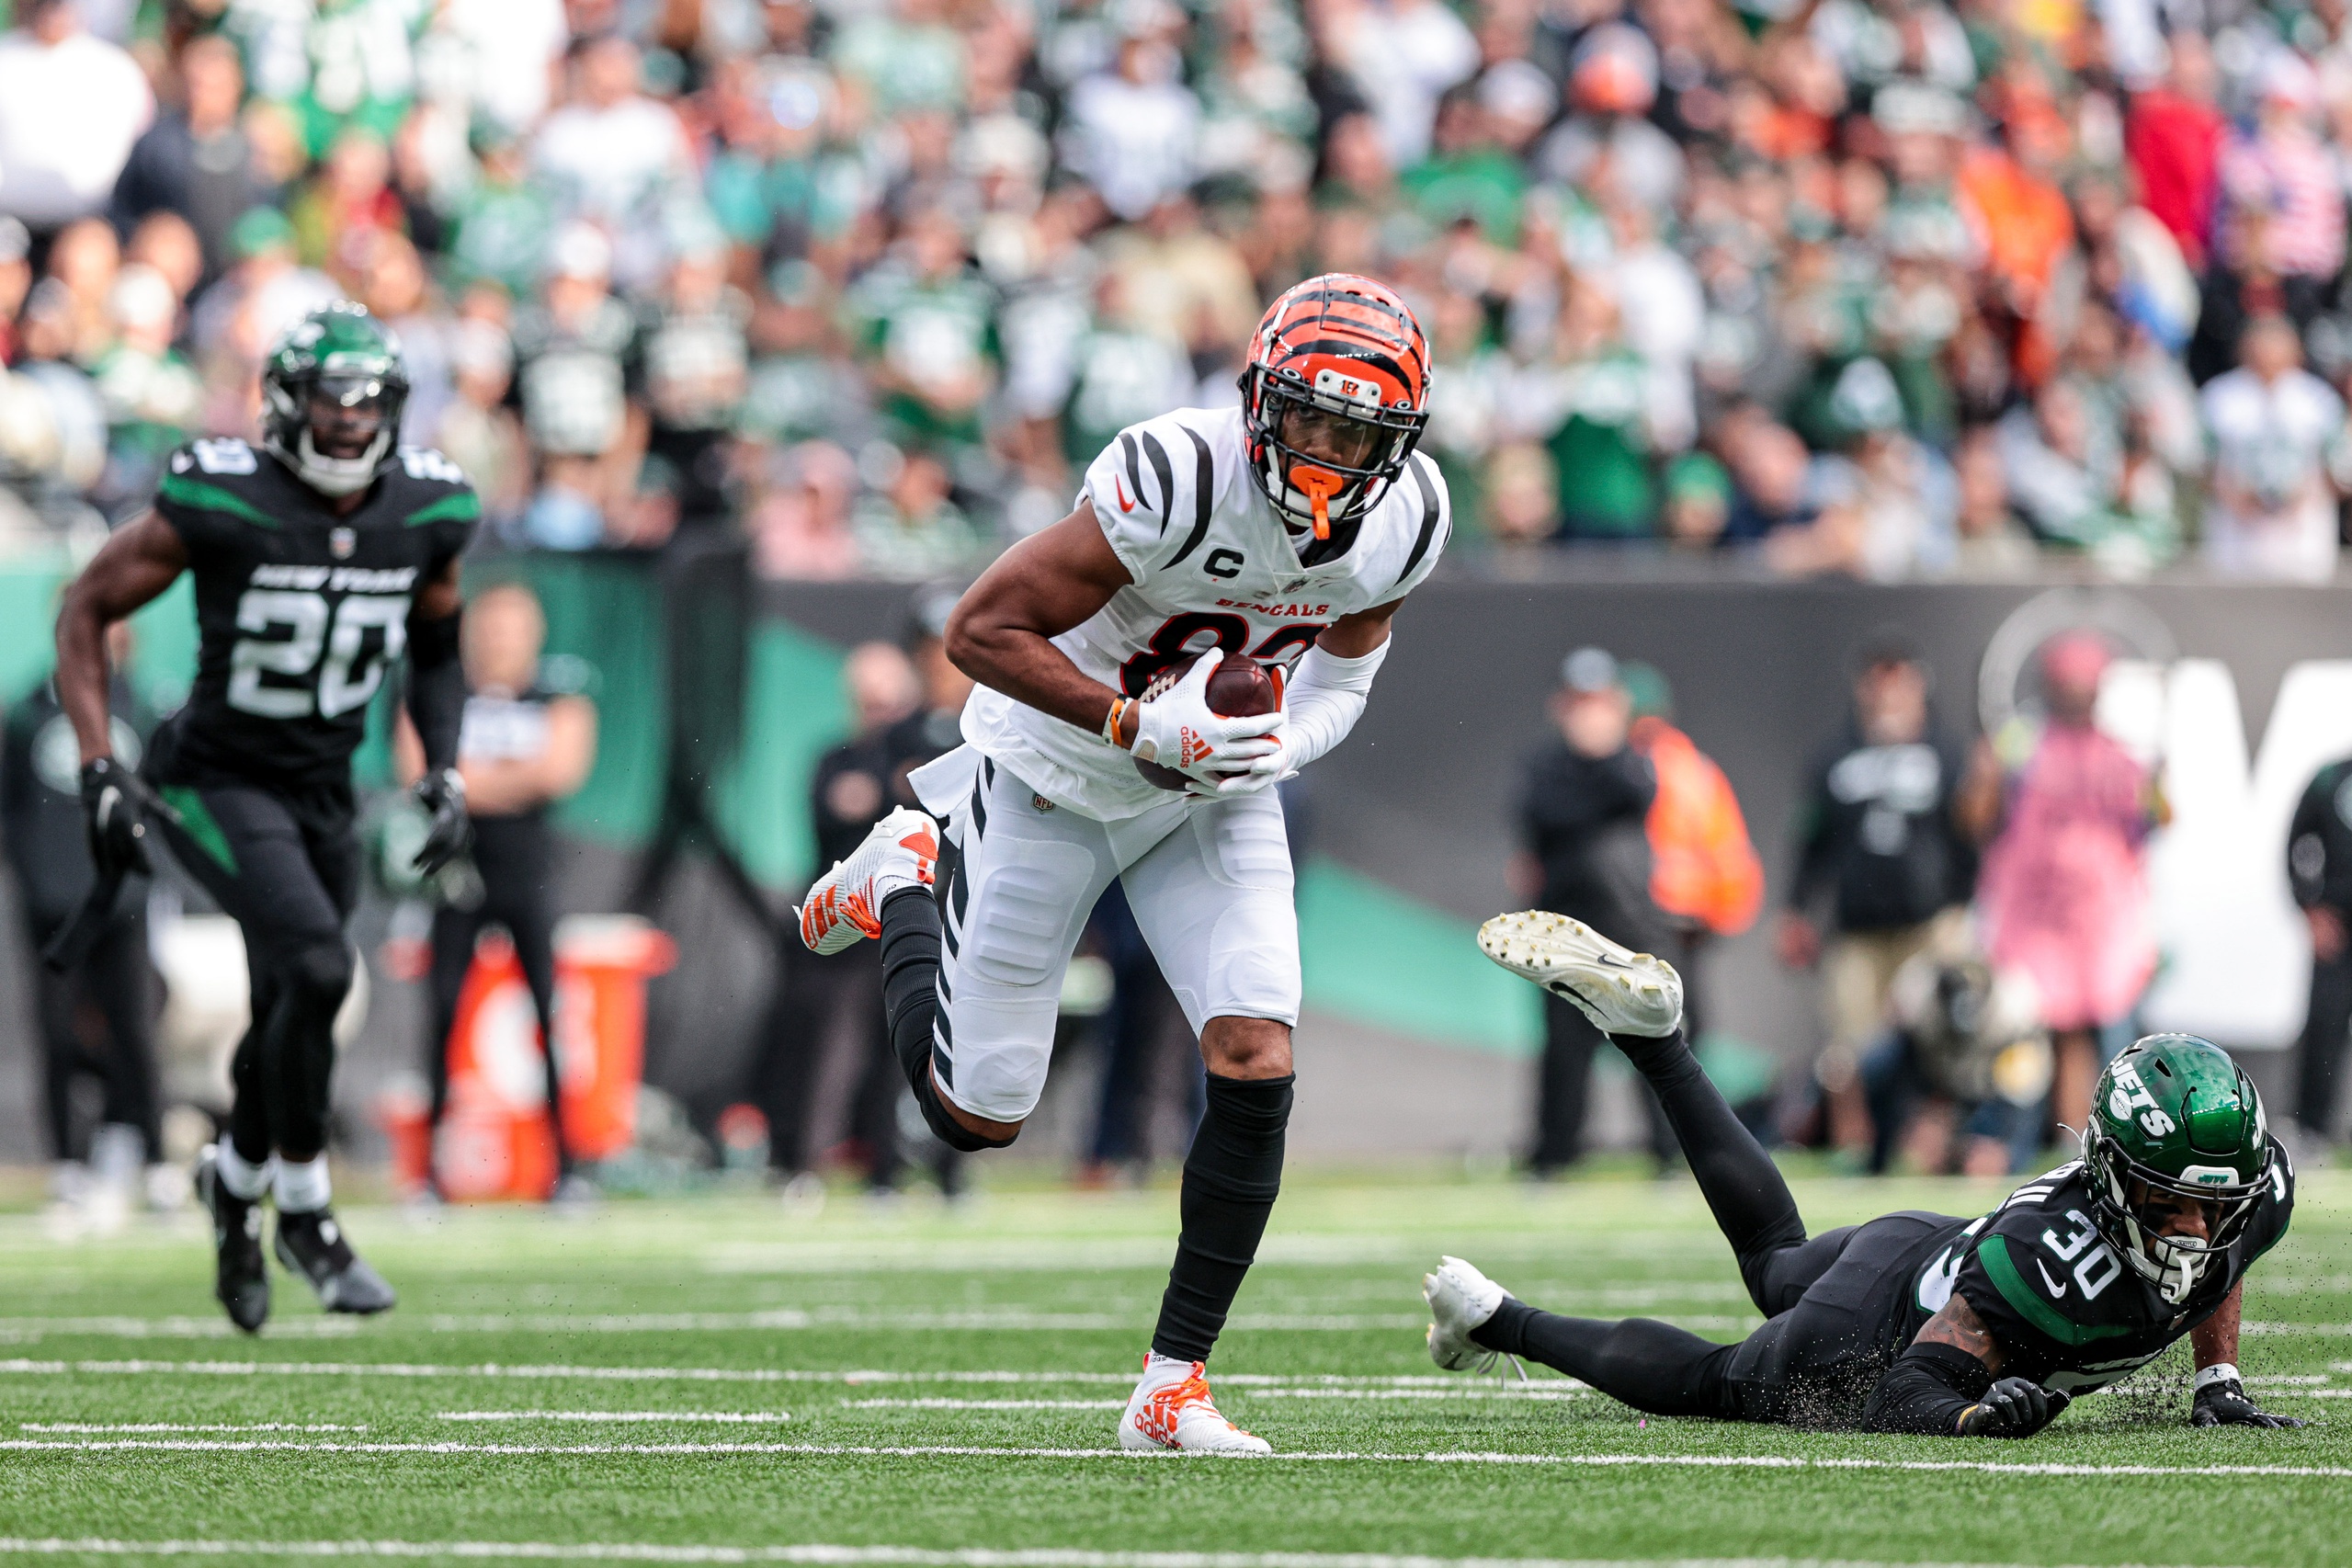 All Bengals Staff Makes Picks For Week 3 Matchup Against New York Jets